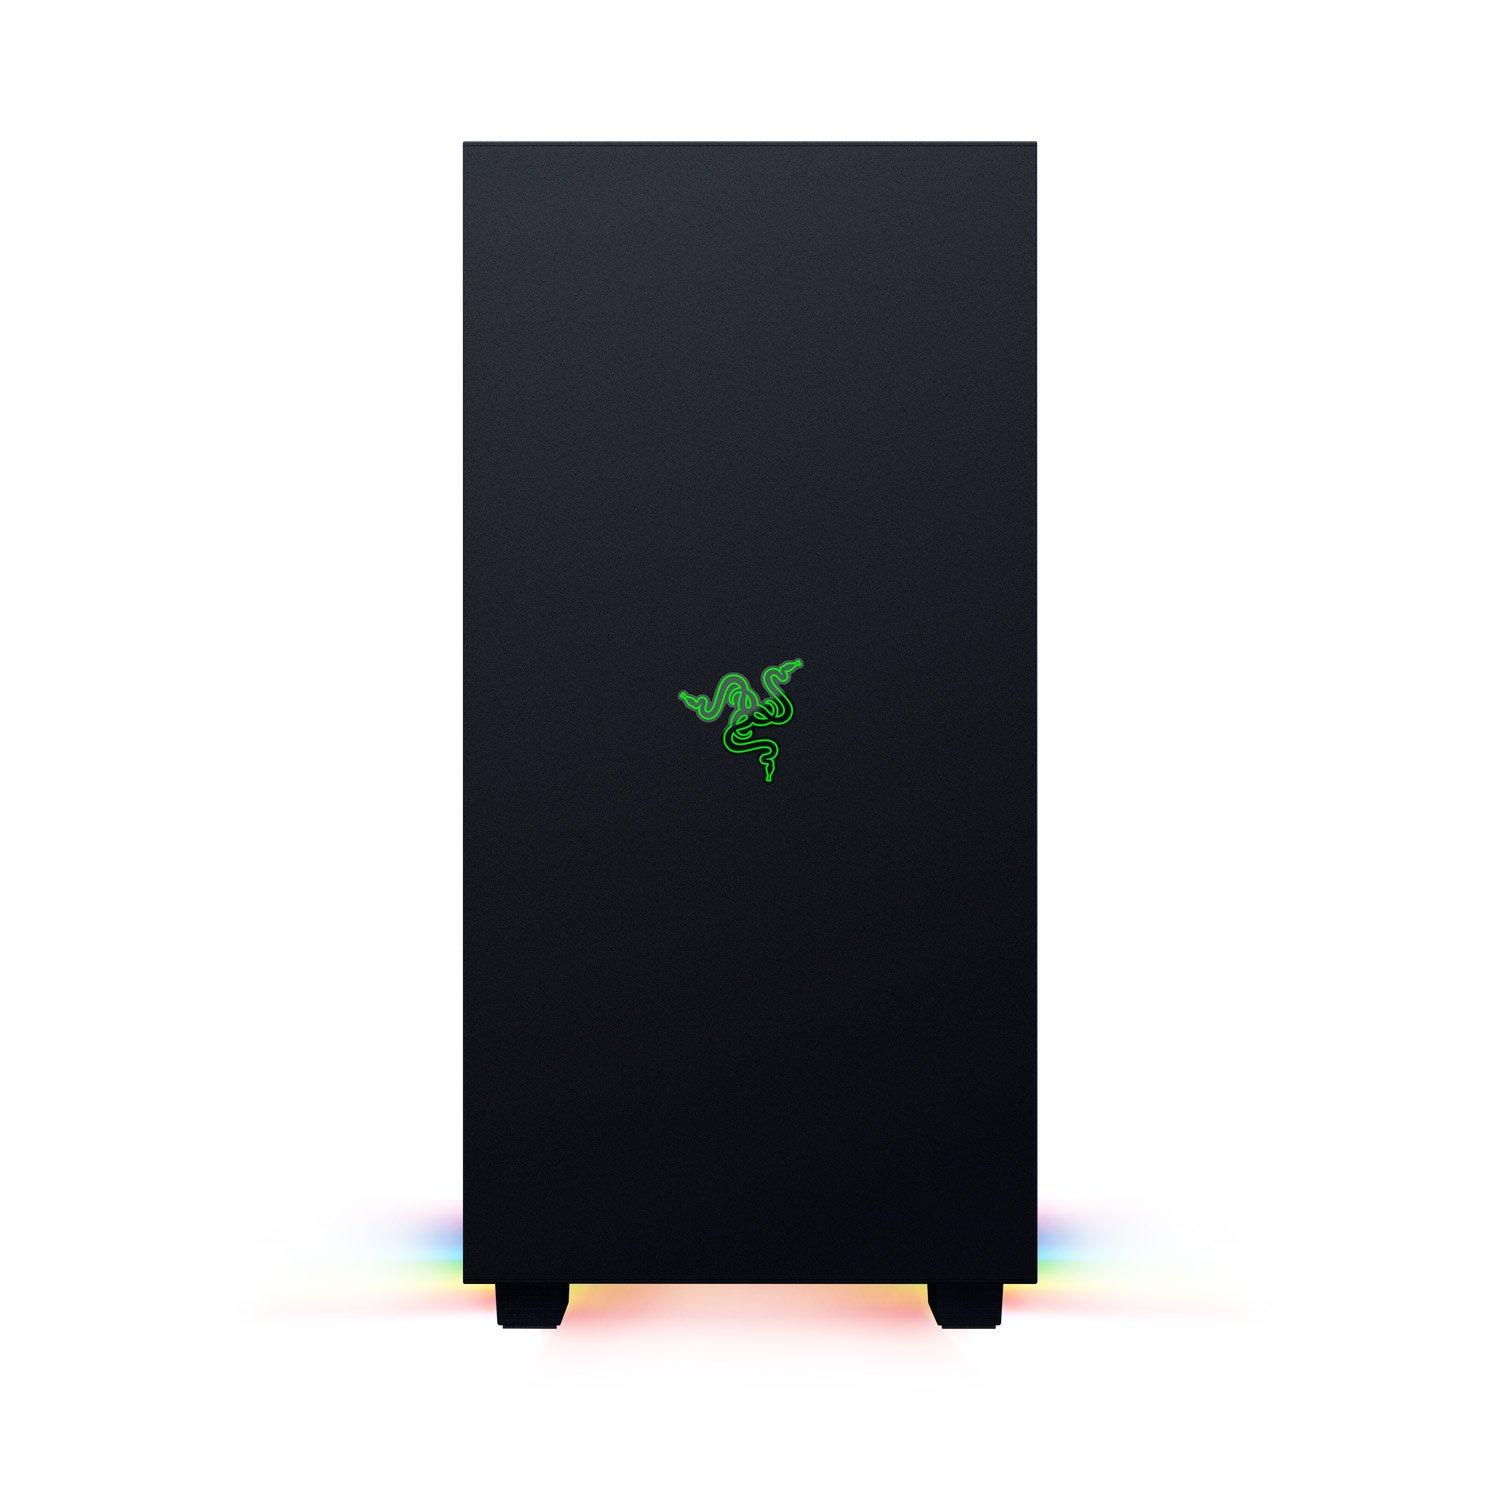 list item 2 of 6 Razer Tomahawk Tempered Glass ATX Mid-Tower Gaming Computer Case with Chroma RGB